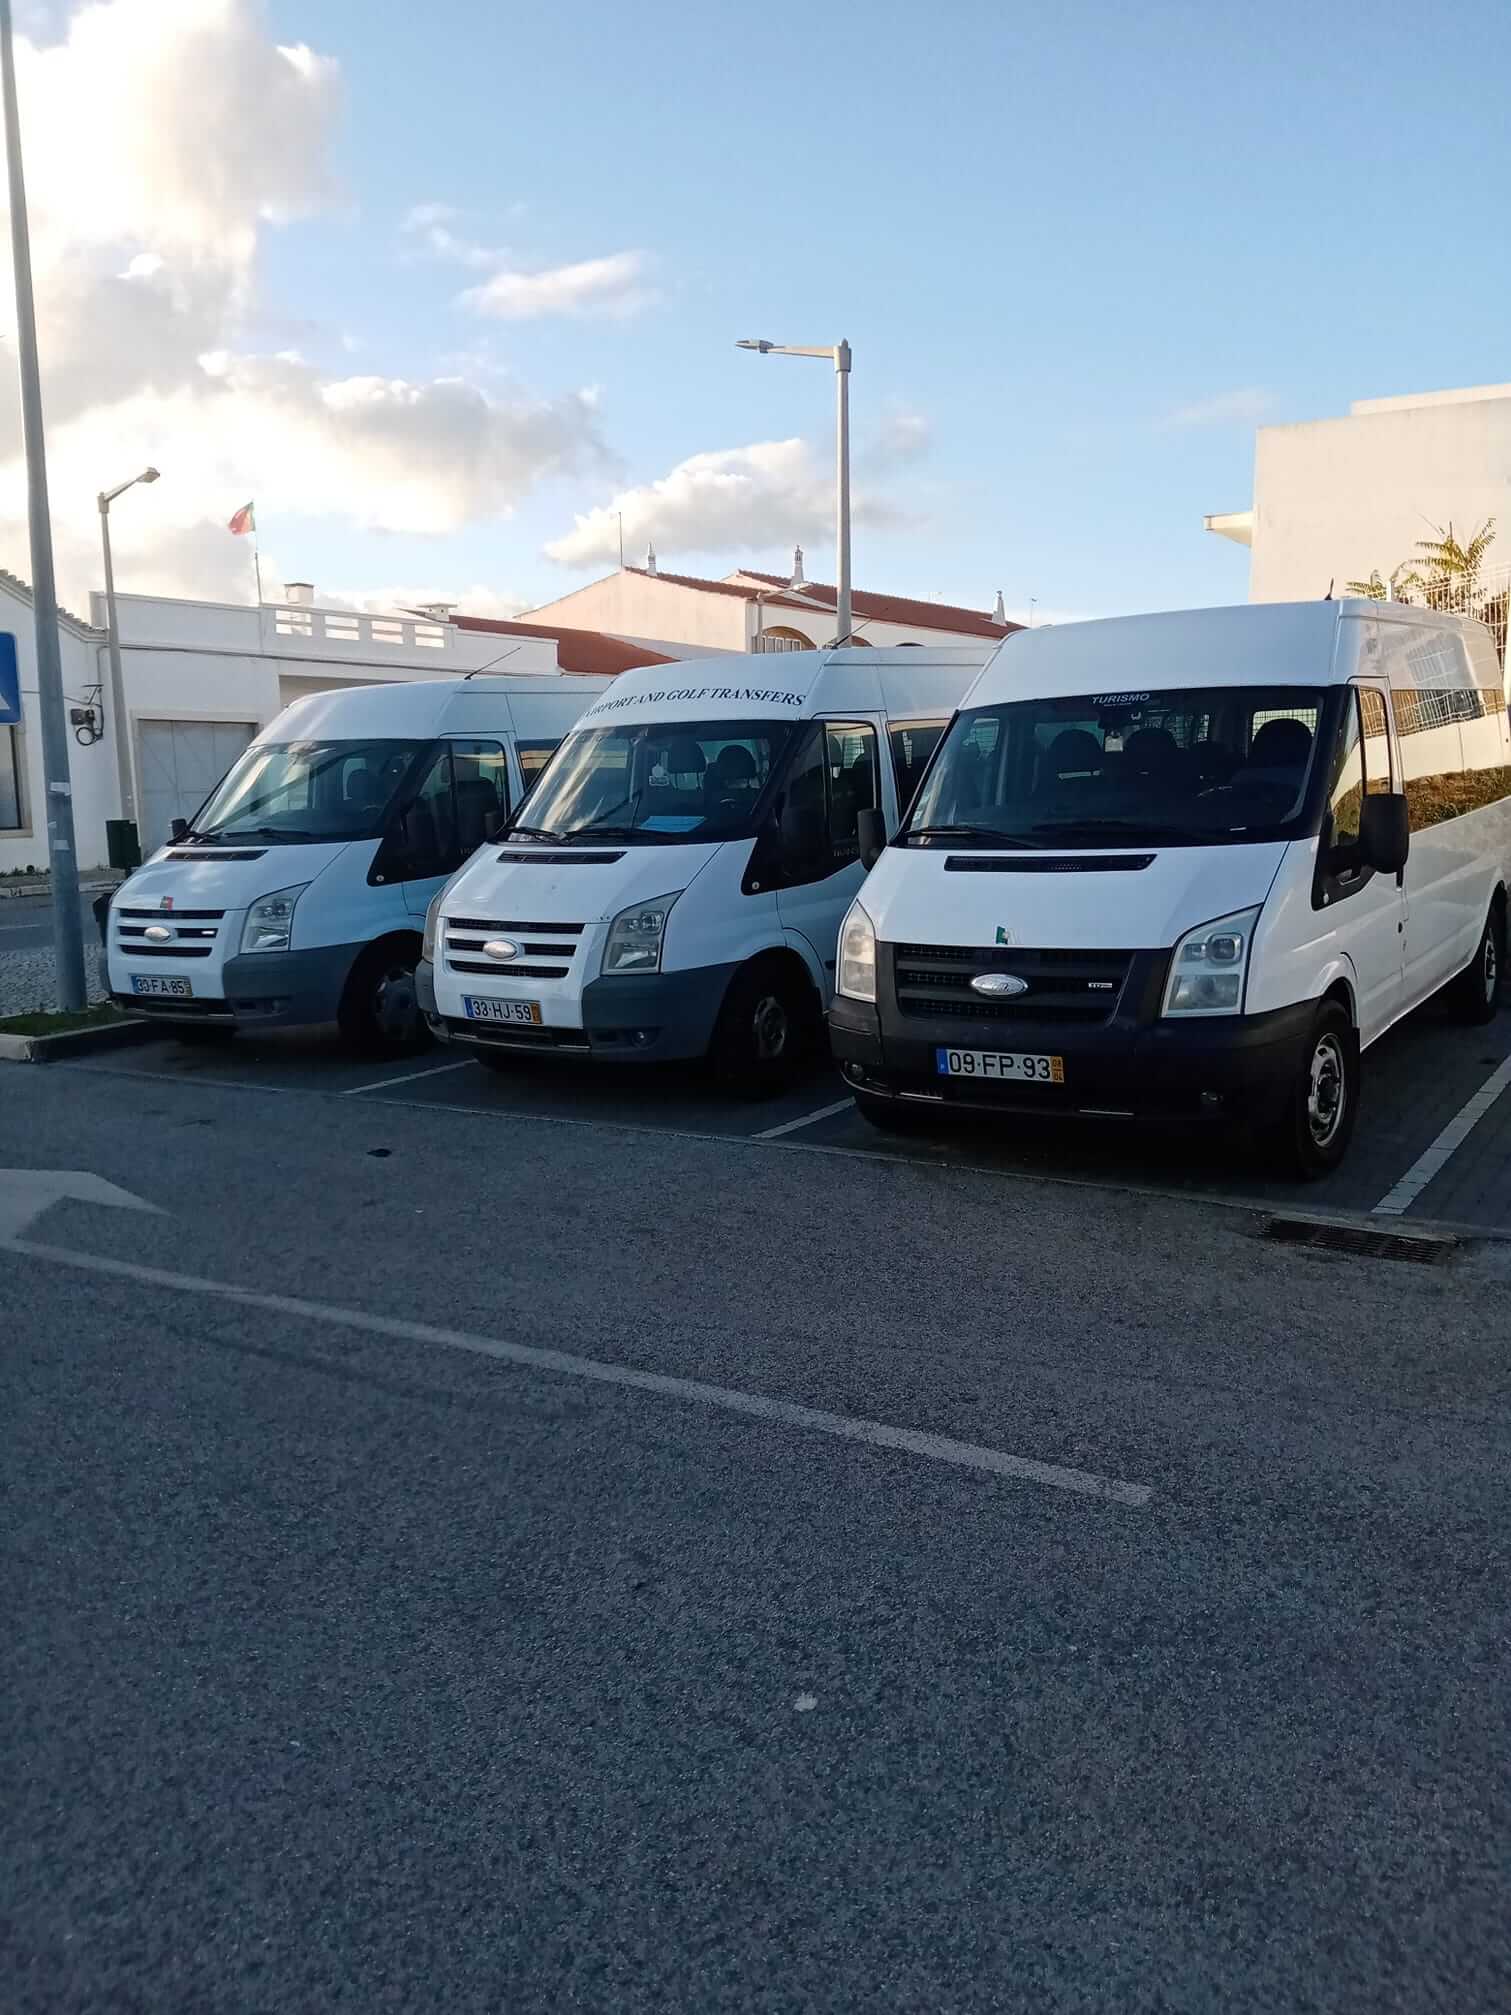 Rent a 9 seater Minivan (Ford Transit 2013) from Algarve365 from Boliqueme 